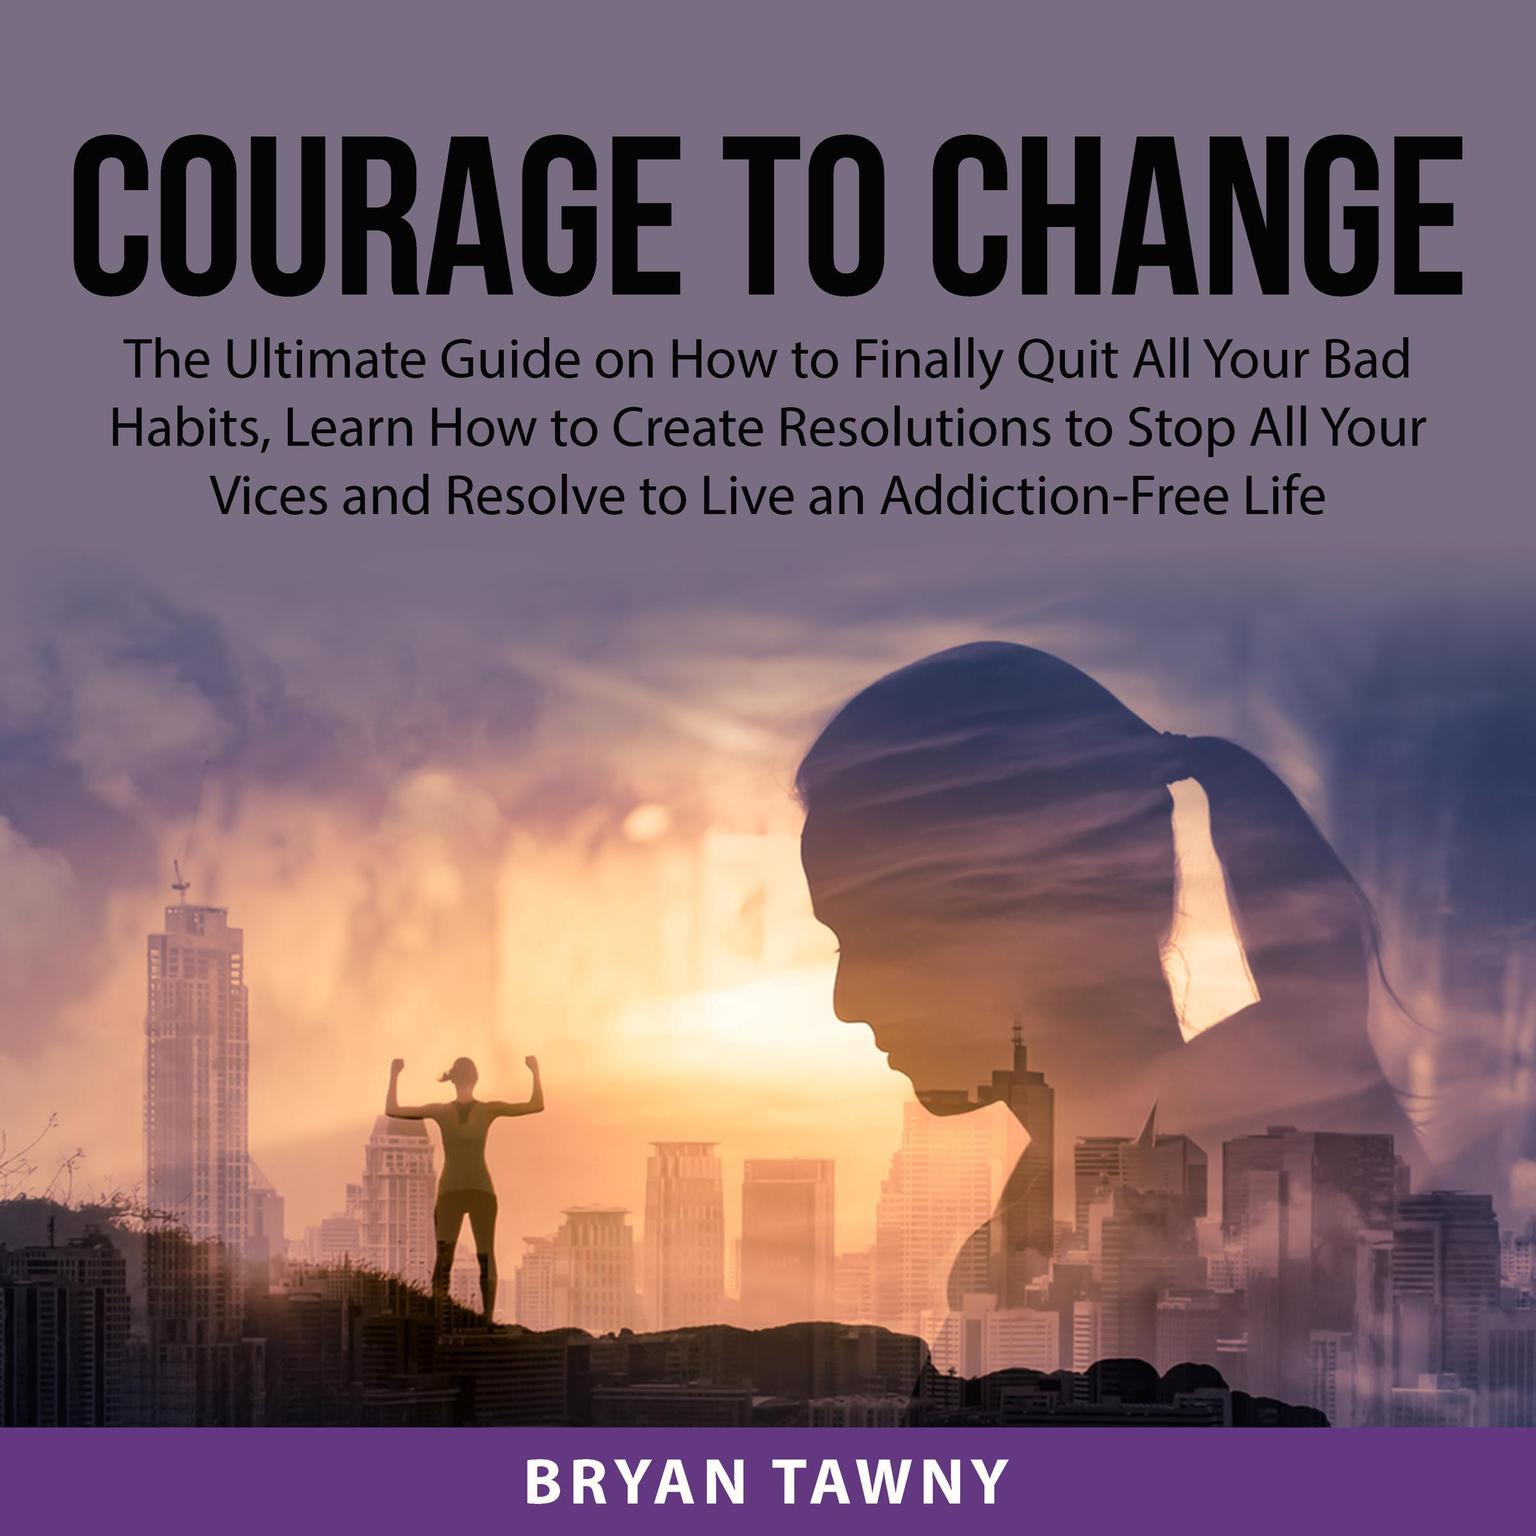 Courage to Change: The Ultimate Guide on How to Finally Quit All Your Bad Habits, Learn How to Create Resolutions to Stop All Your Vices and Resolve to Live an Addiction-Free Life Audiobook, by Bryan Tawny